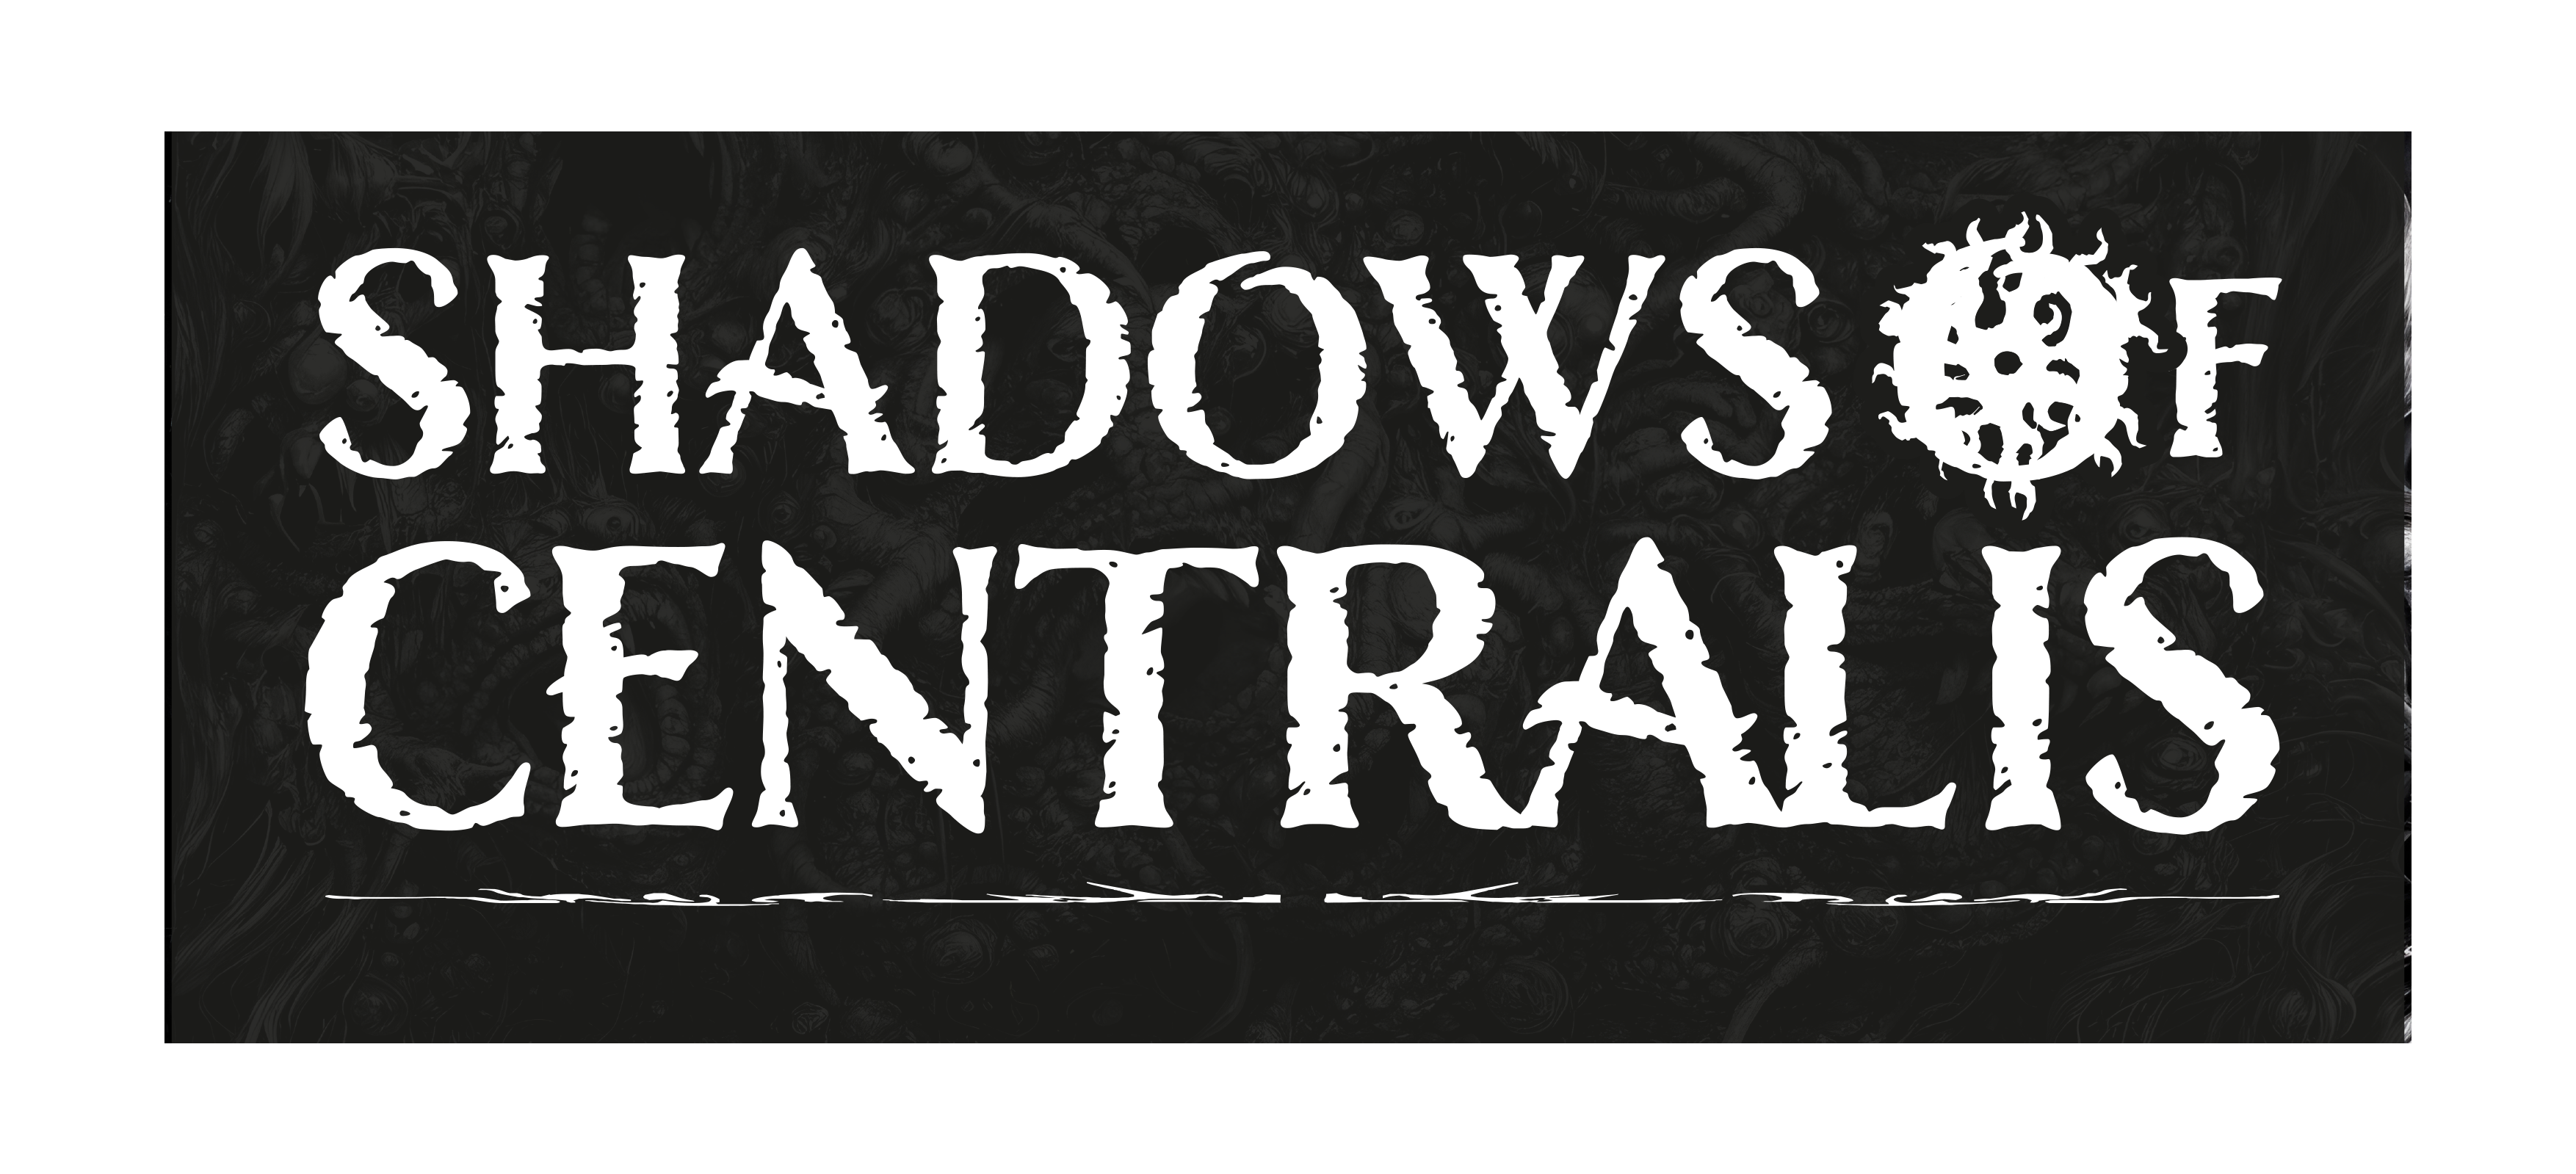 Shadows of Centralis logo by Wombat Wargames